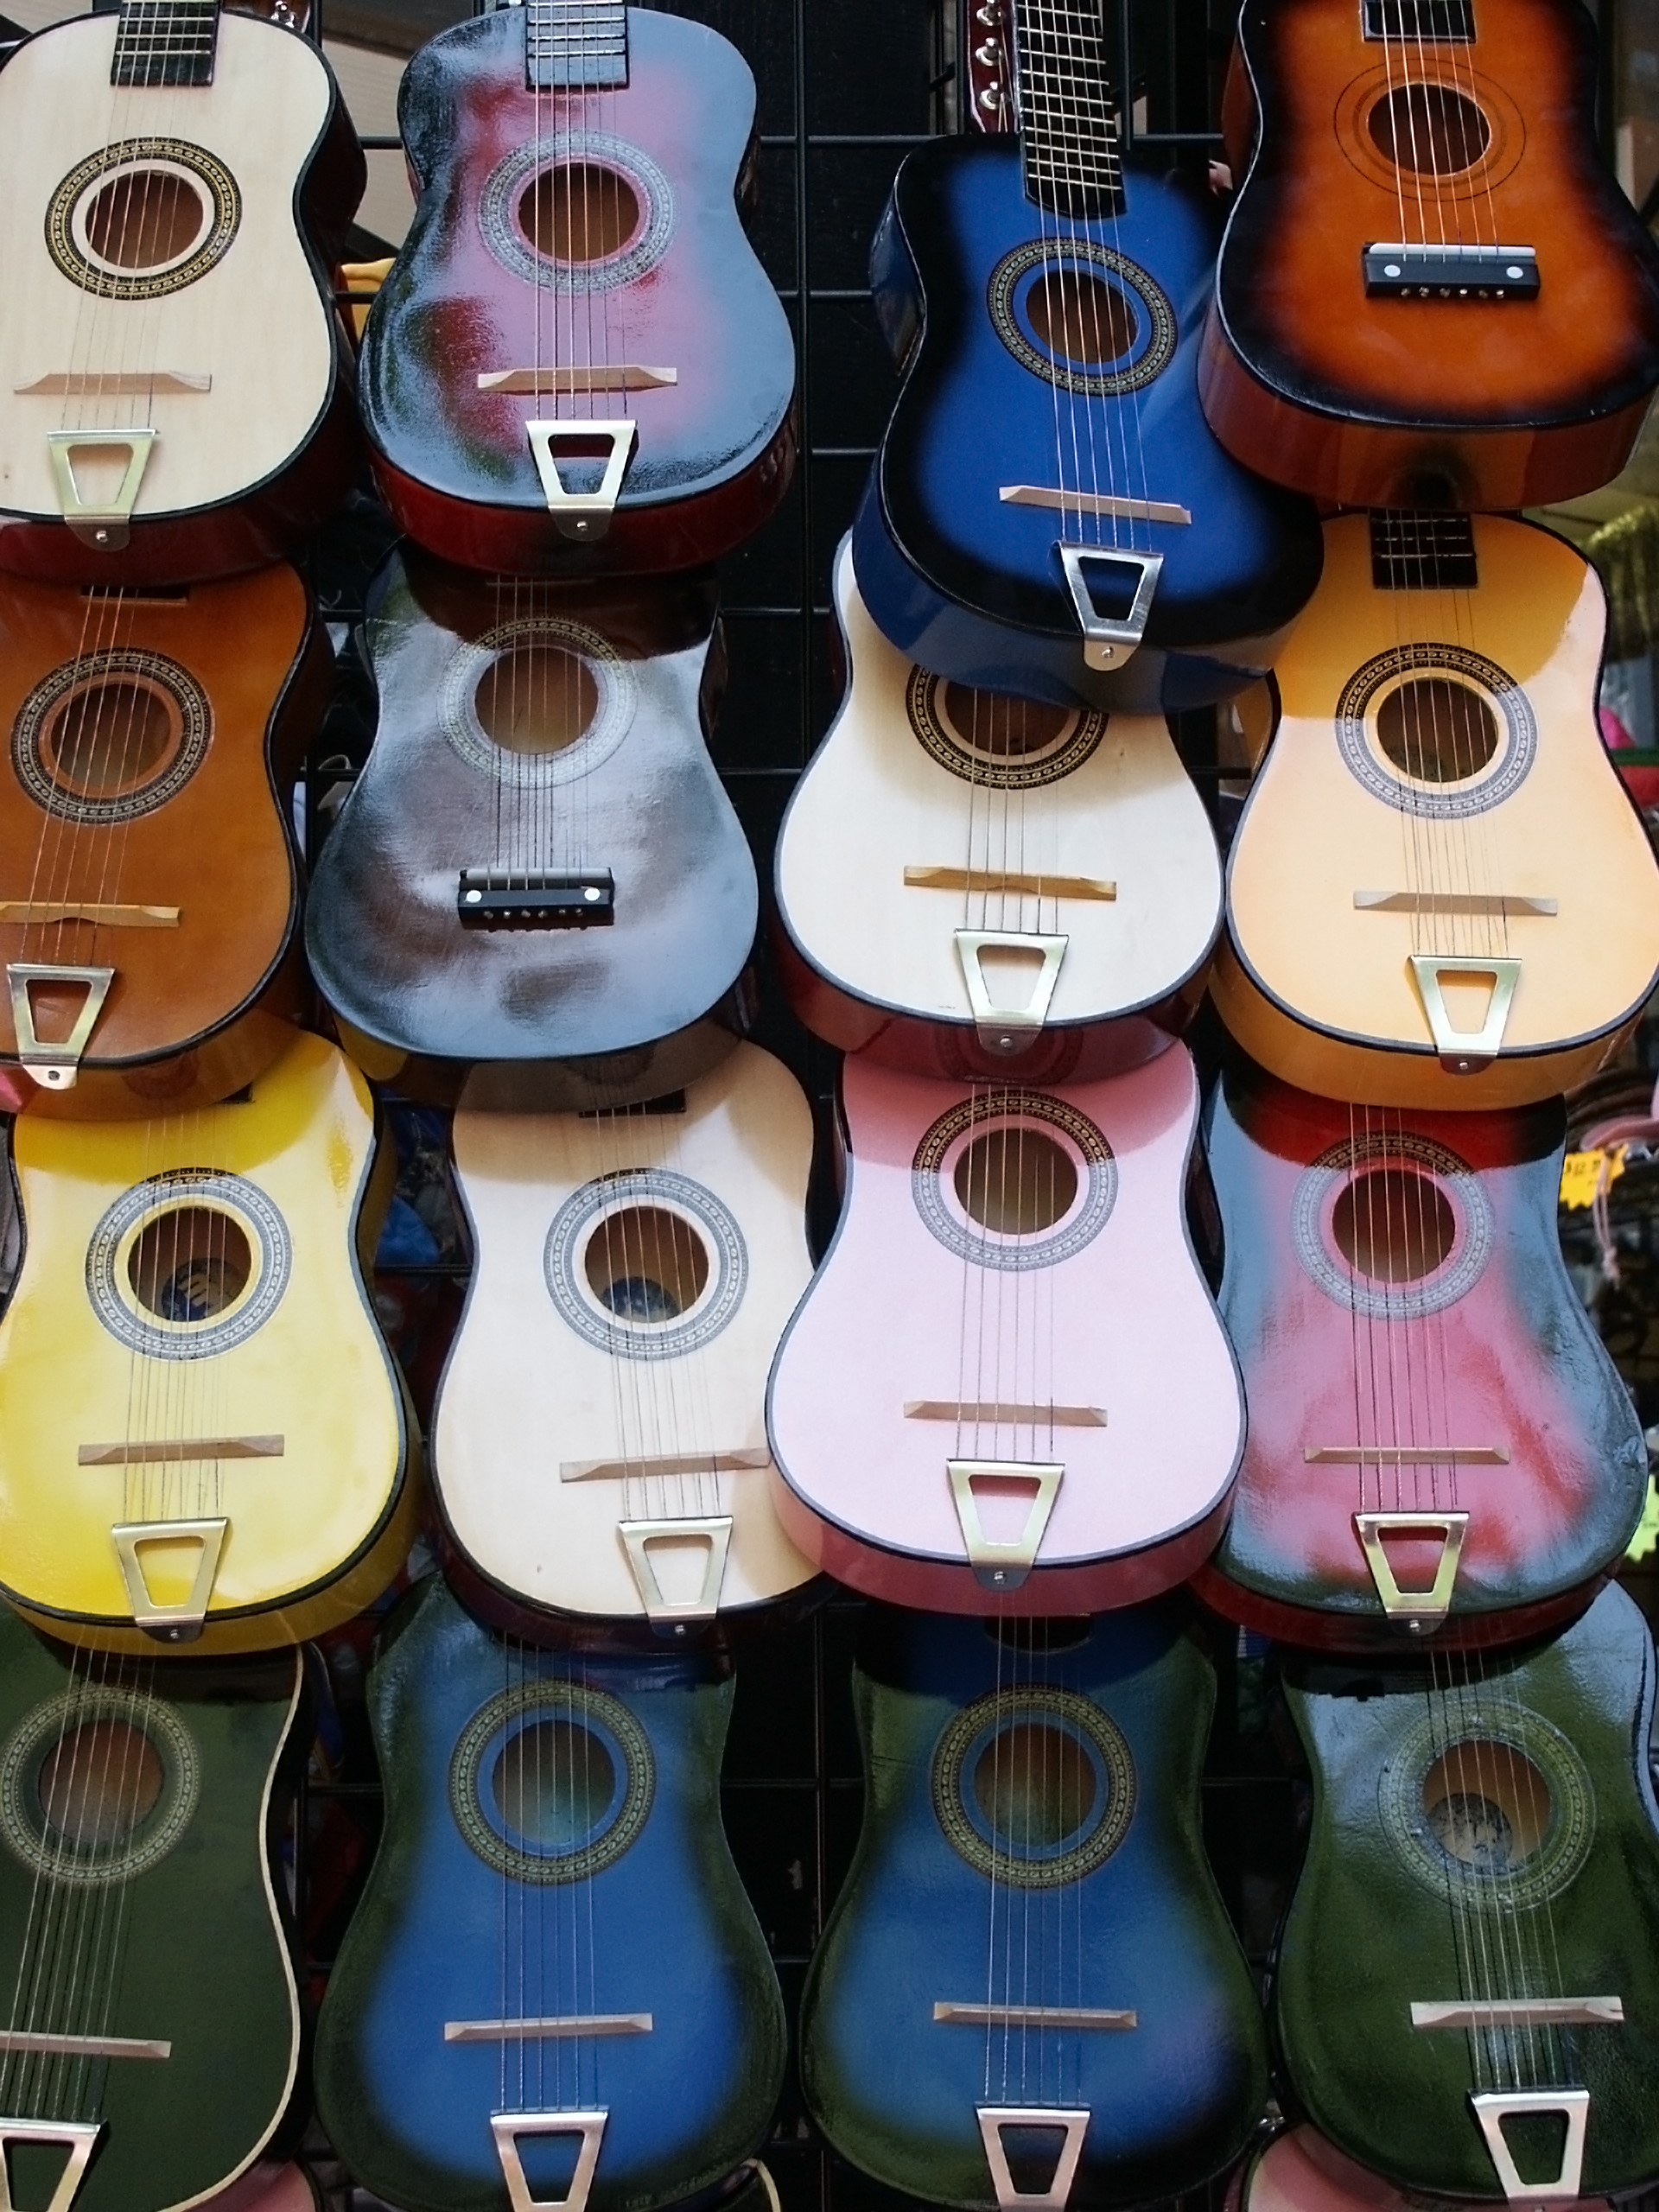 Colorful Guitars in Mexico